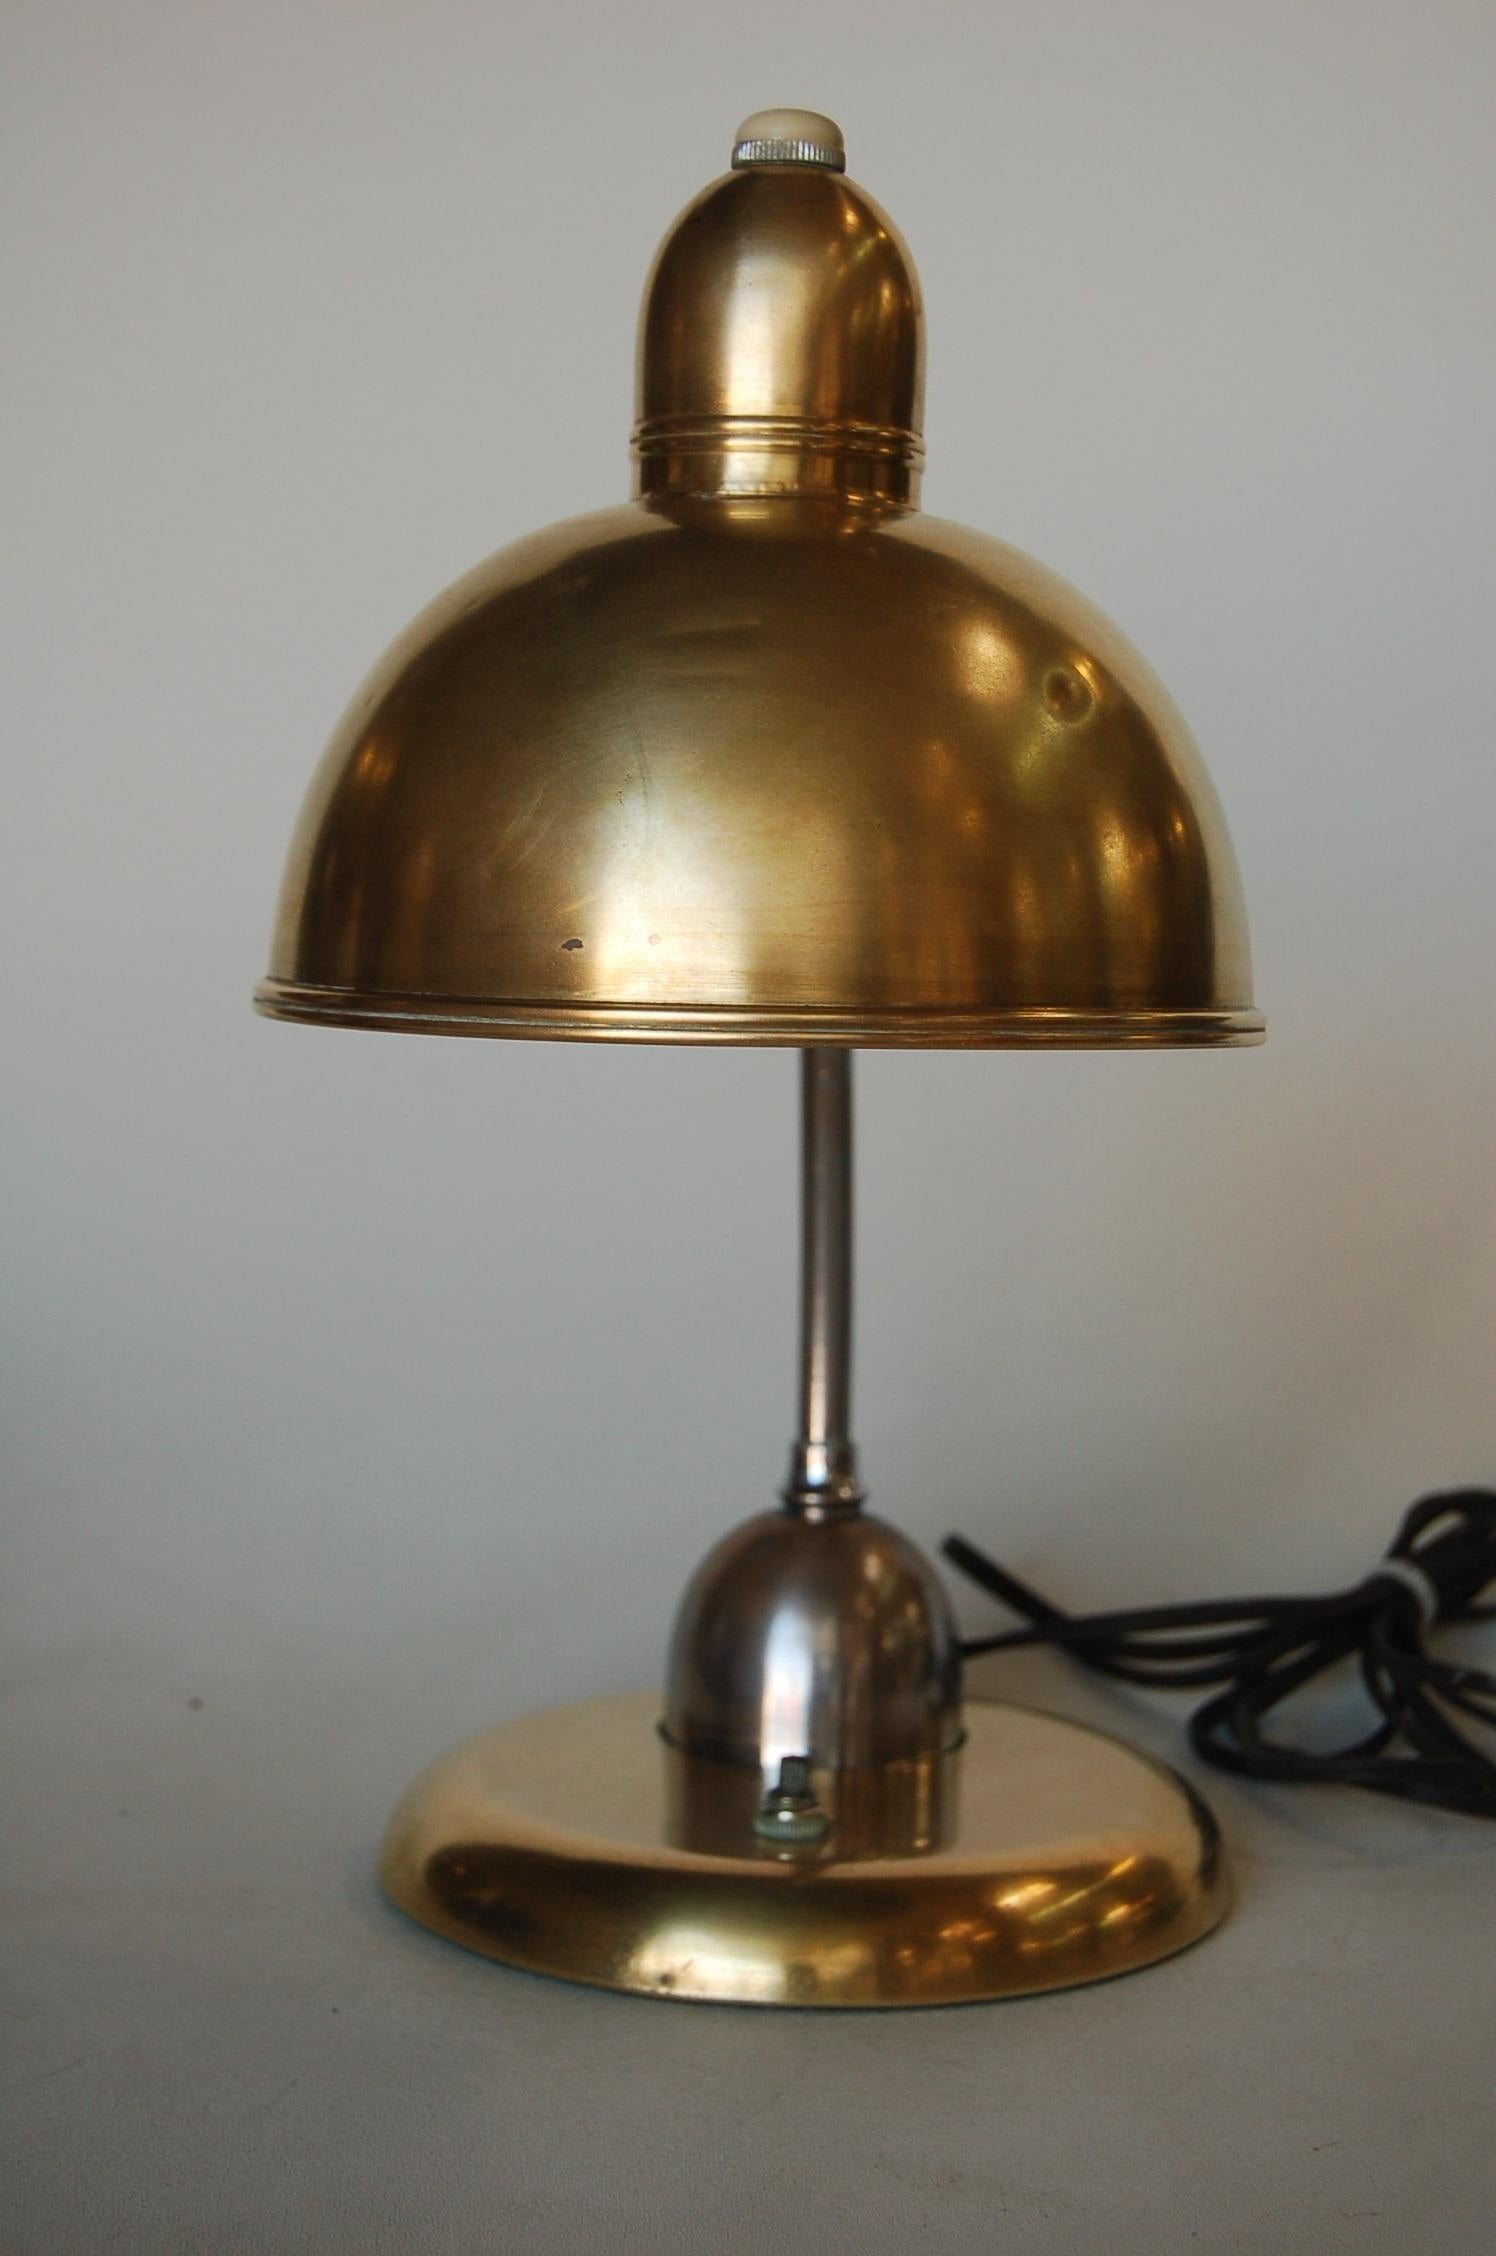 Machine Age brass and chrome bell shaped reading desk lamp. Measures: 13